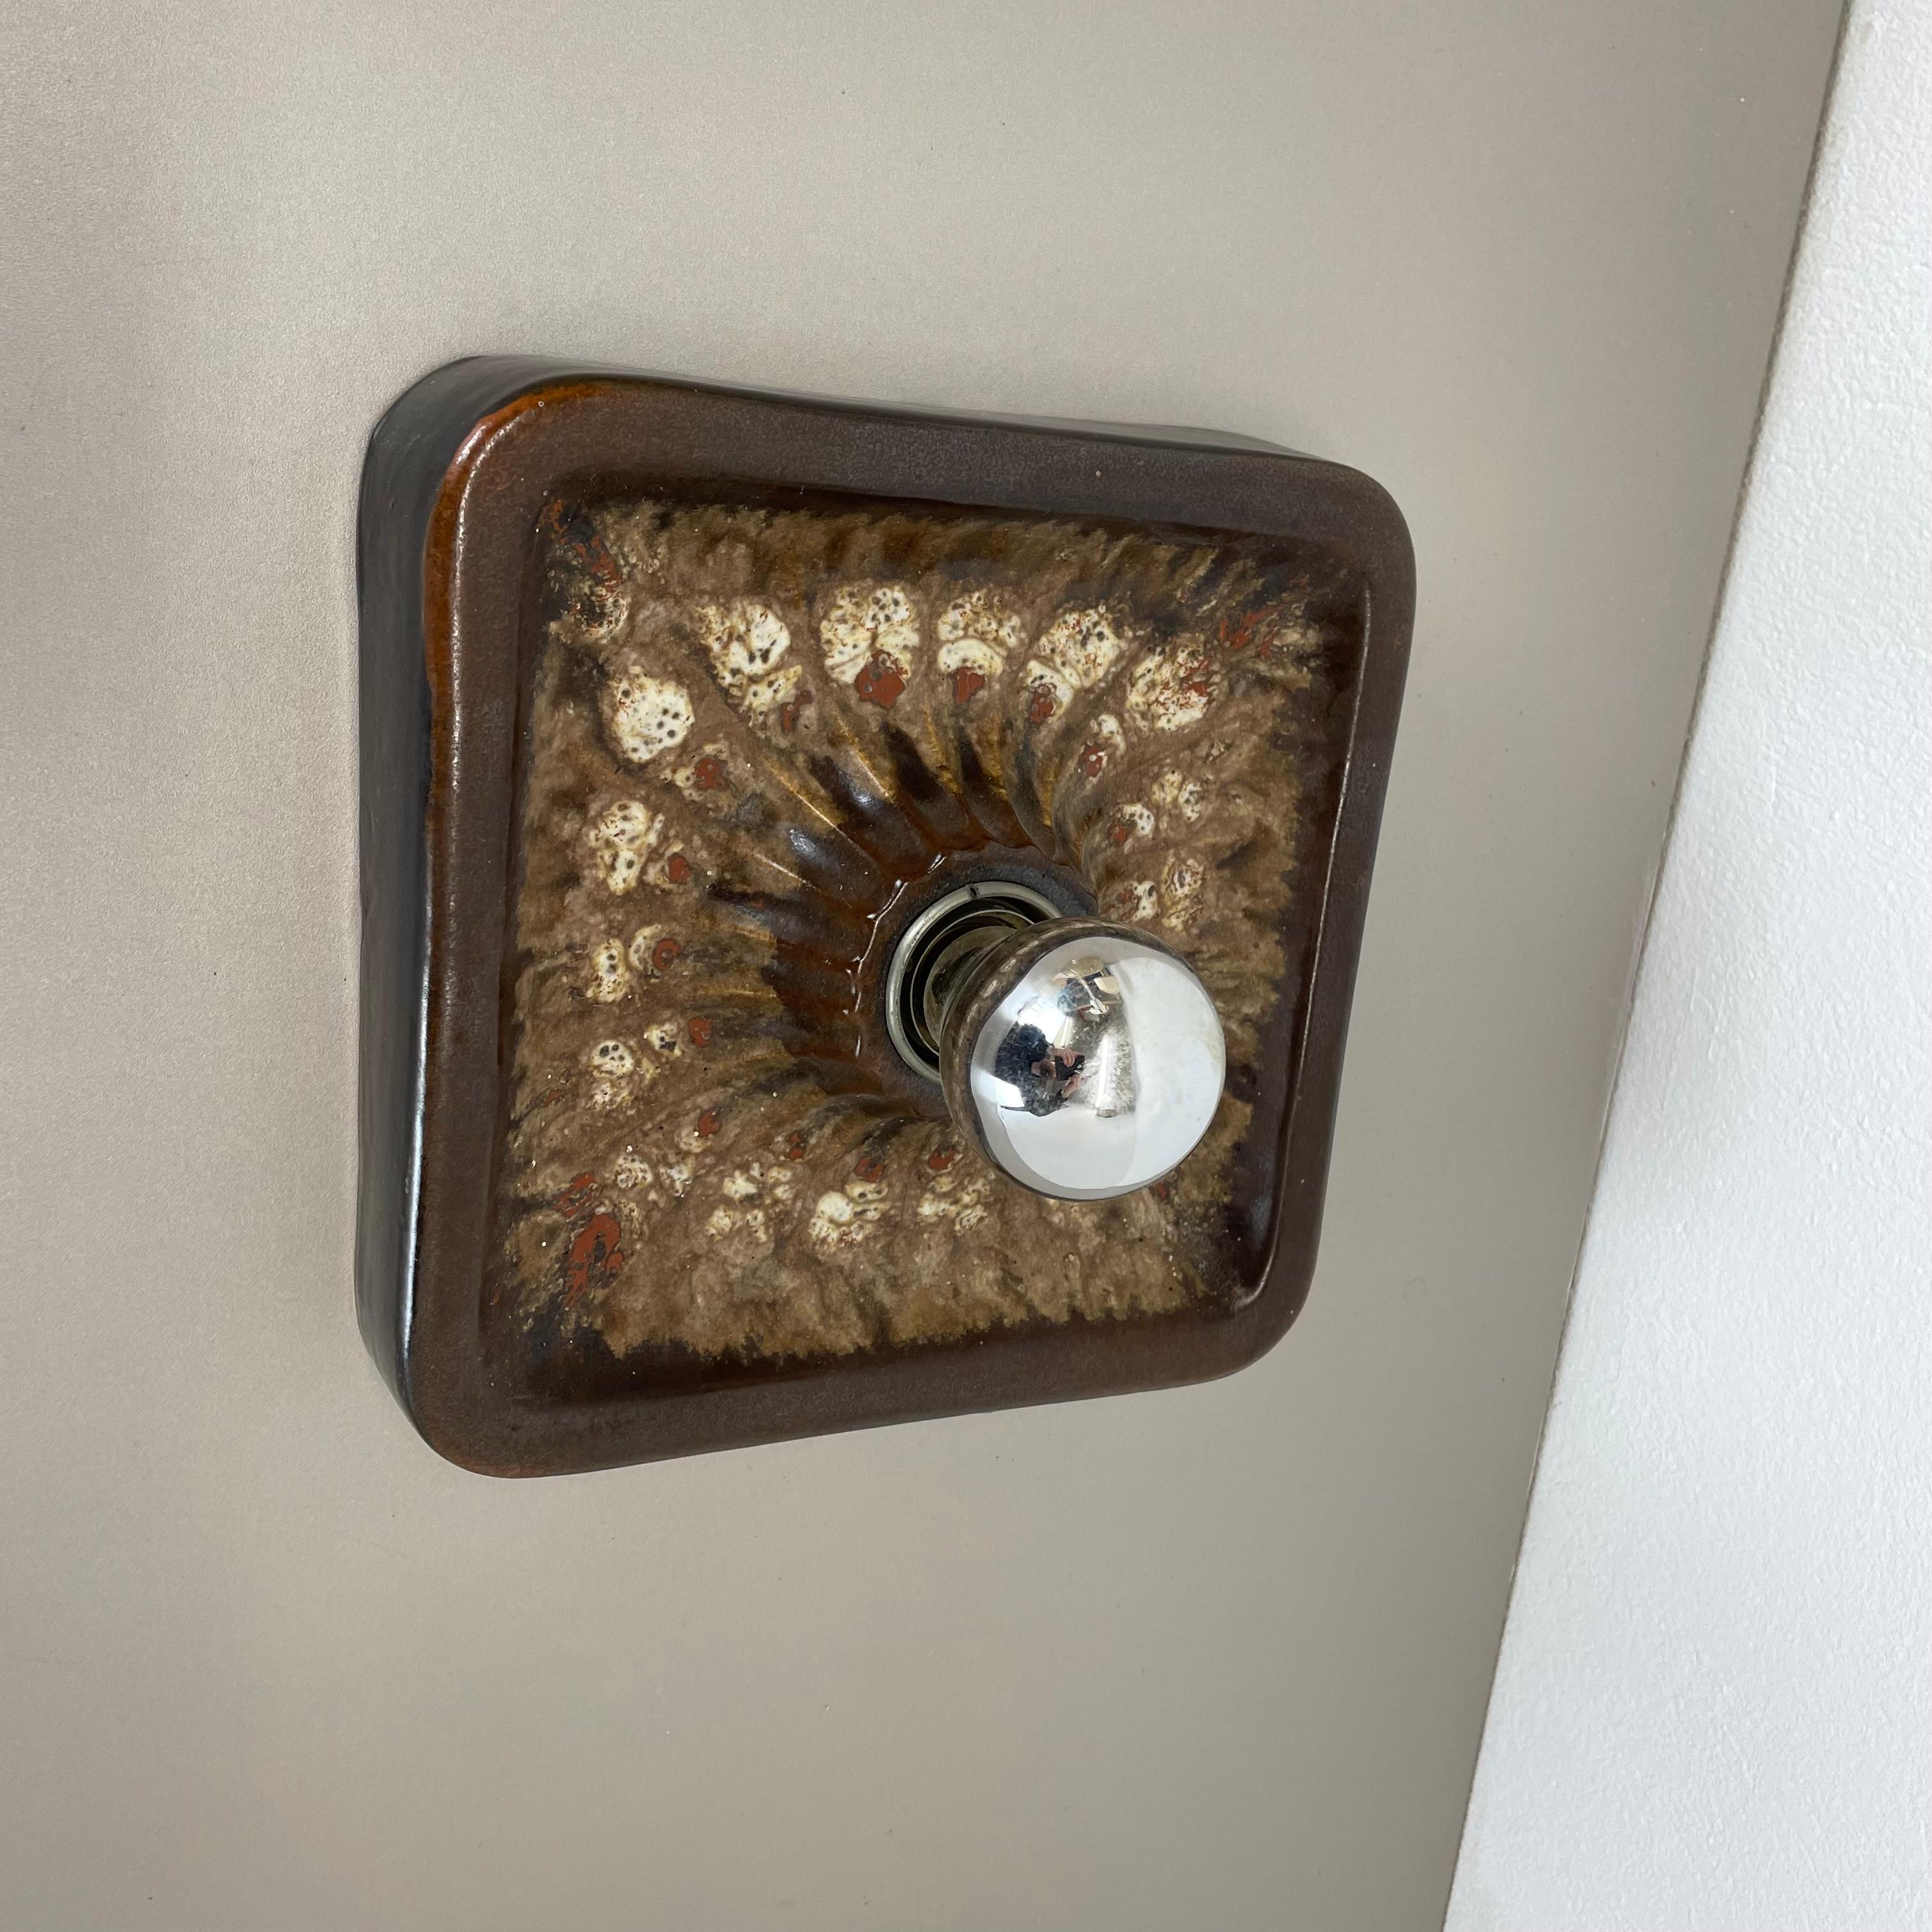 Article:

Wall light sconce


Origin:

Germany.


Producer:

Hustadt Leuchten



Age:

1970s.



Description:

Original 1970s modernist German wall light made of ceramic in fat lava optic. This super rare light was produced in the 1970s in a POP ART